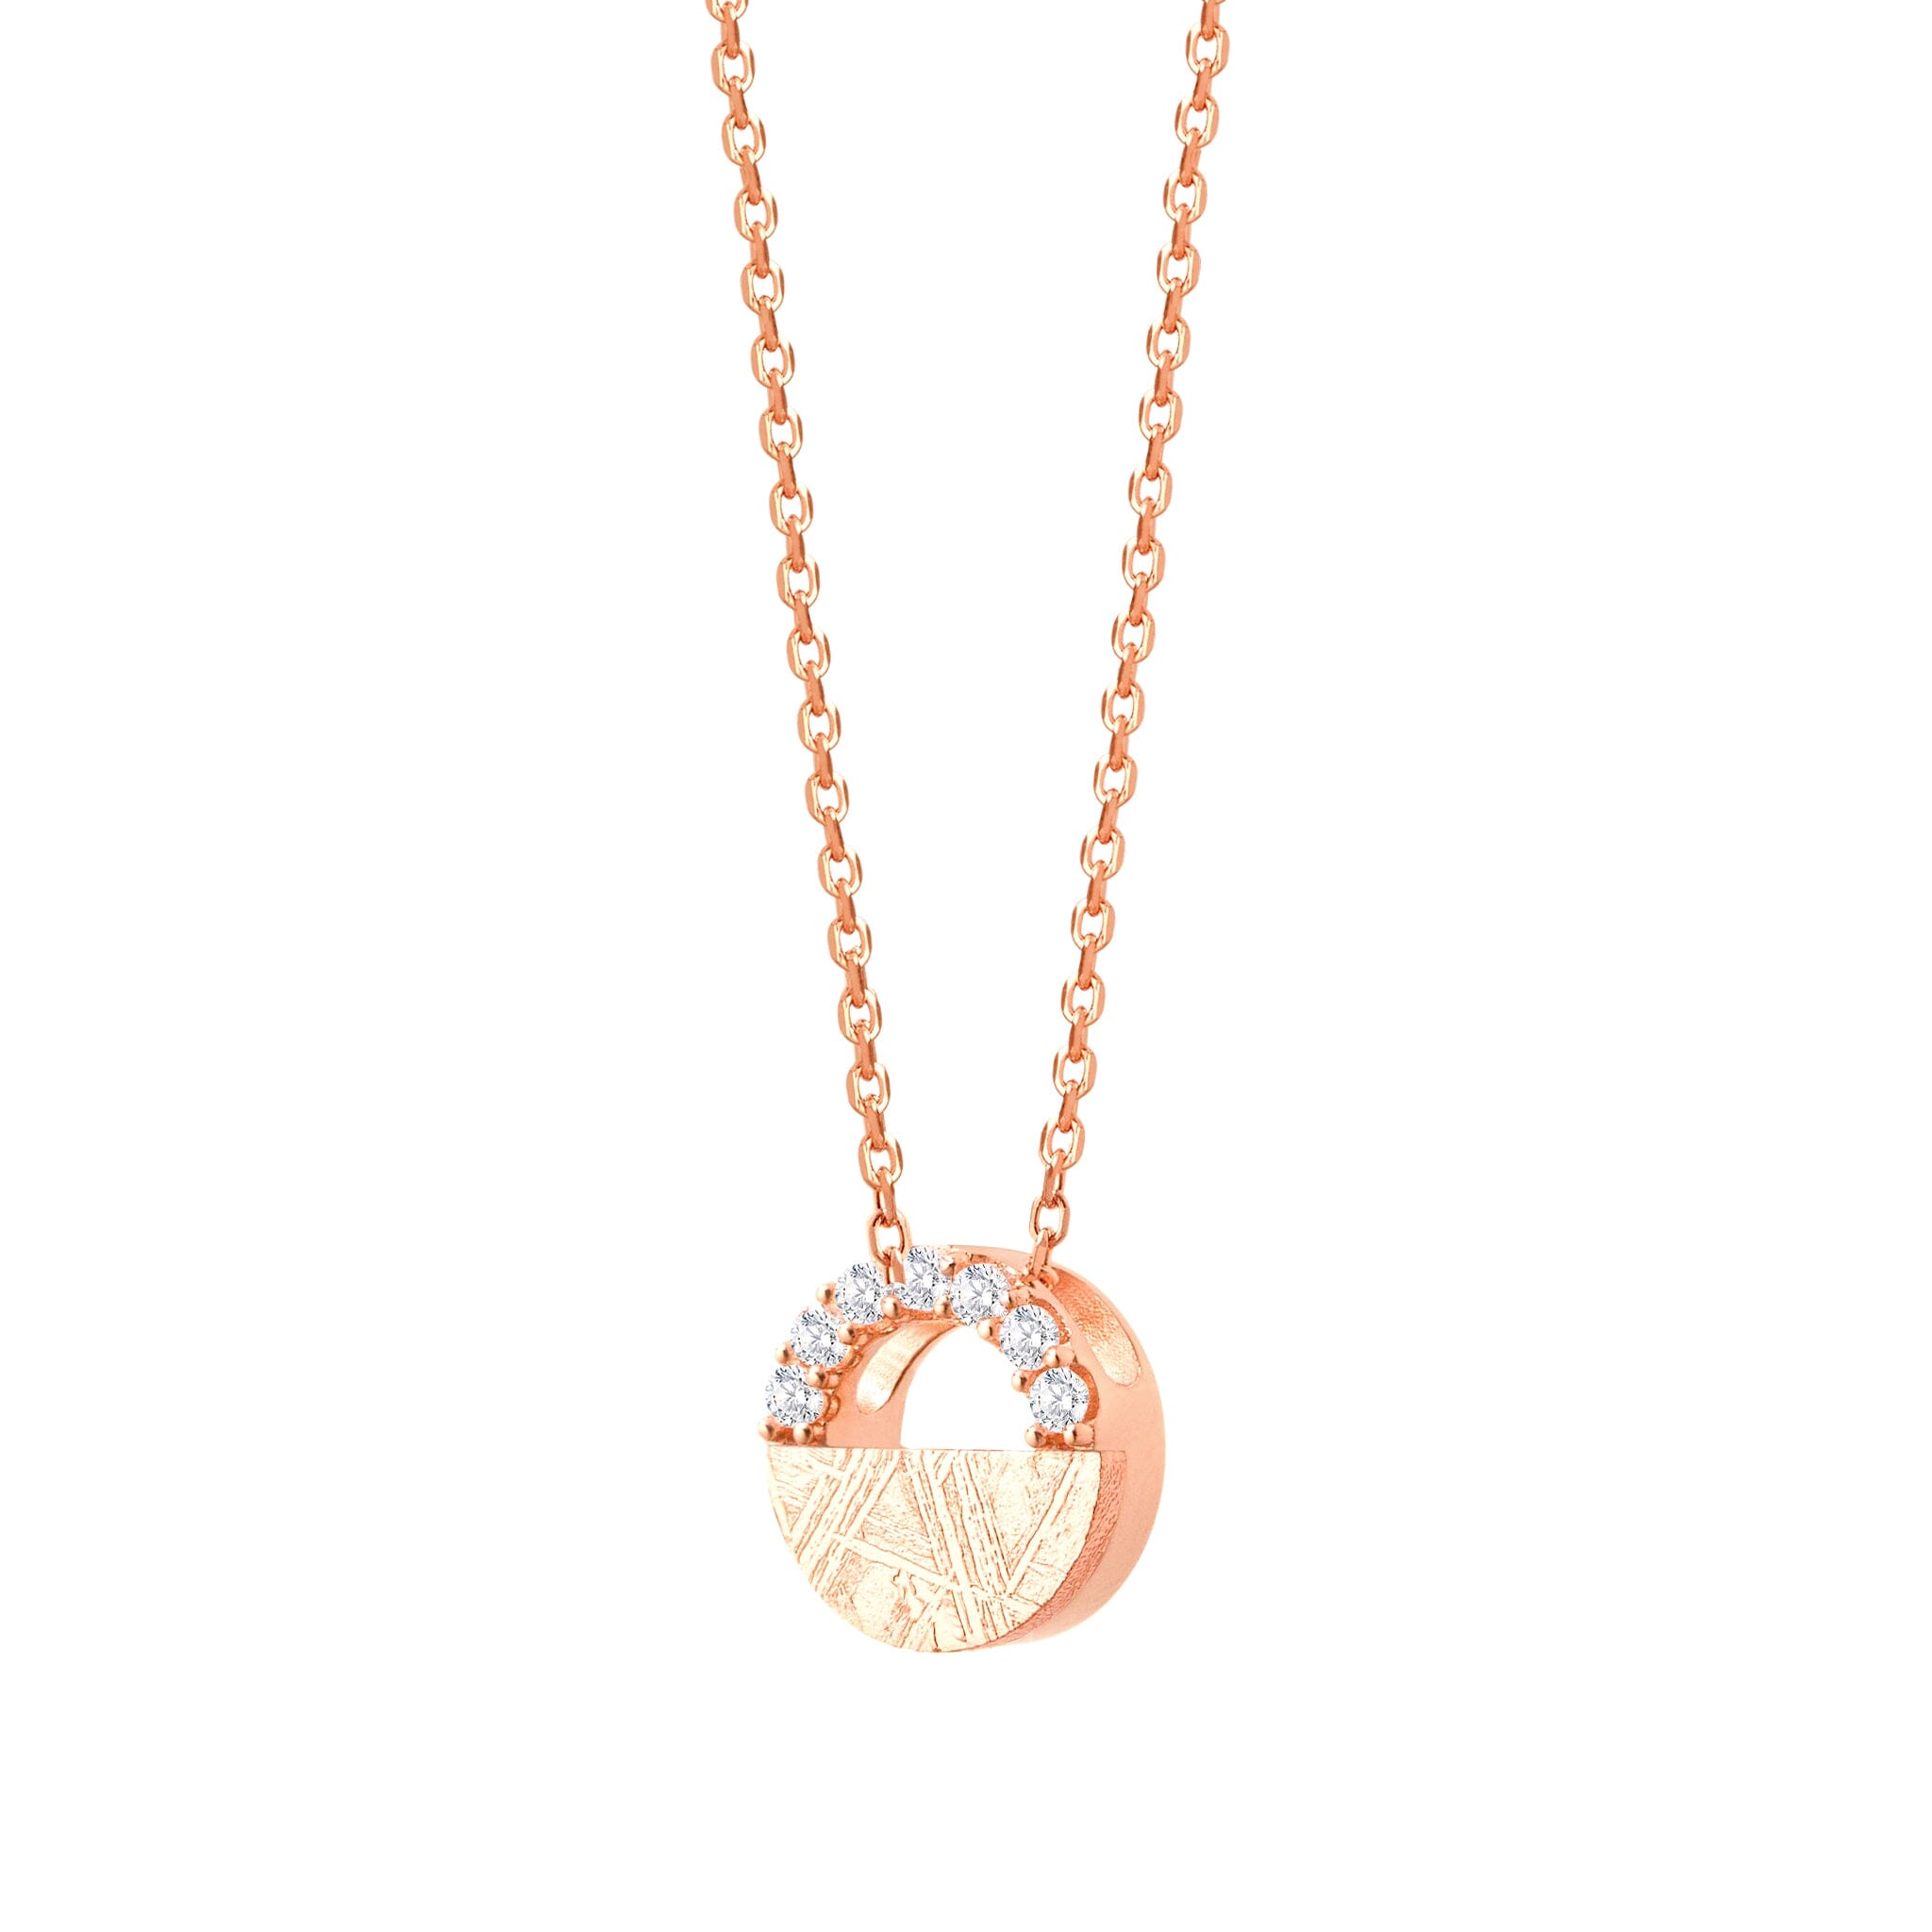 Women's Starry Night Necklace with Meteorite Necklaces WAA FASHION GROUP Rose Gold Adjustable 